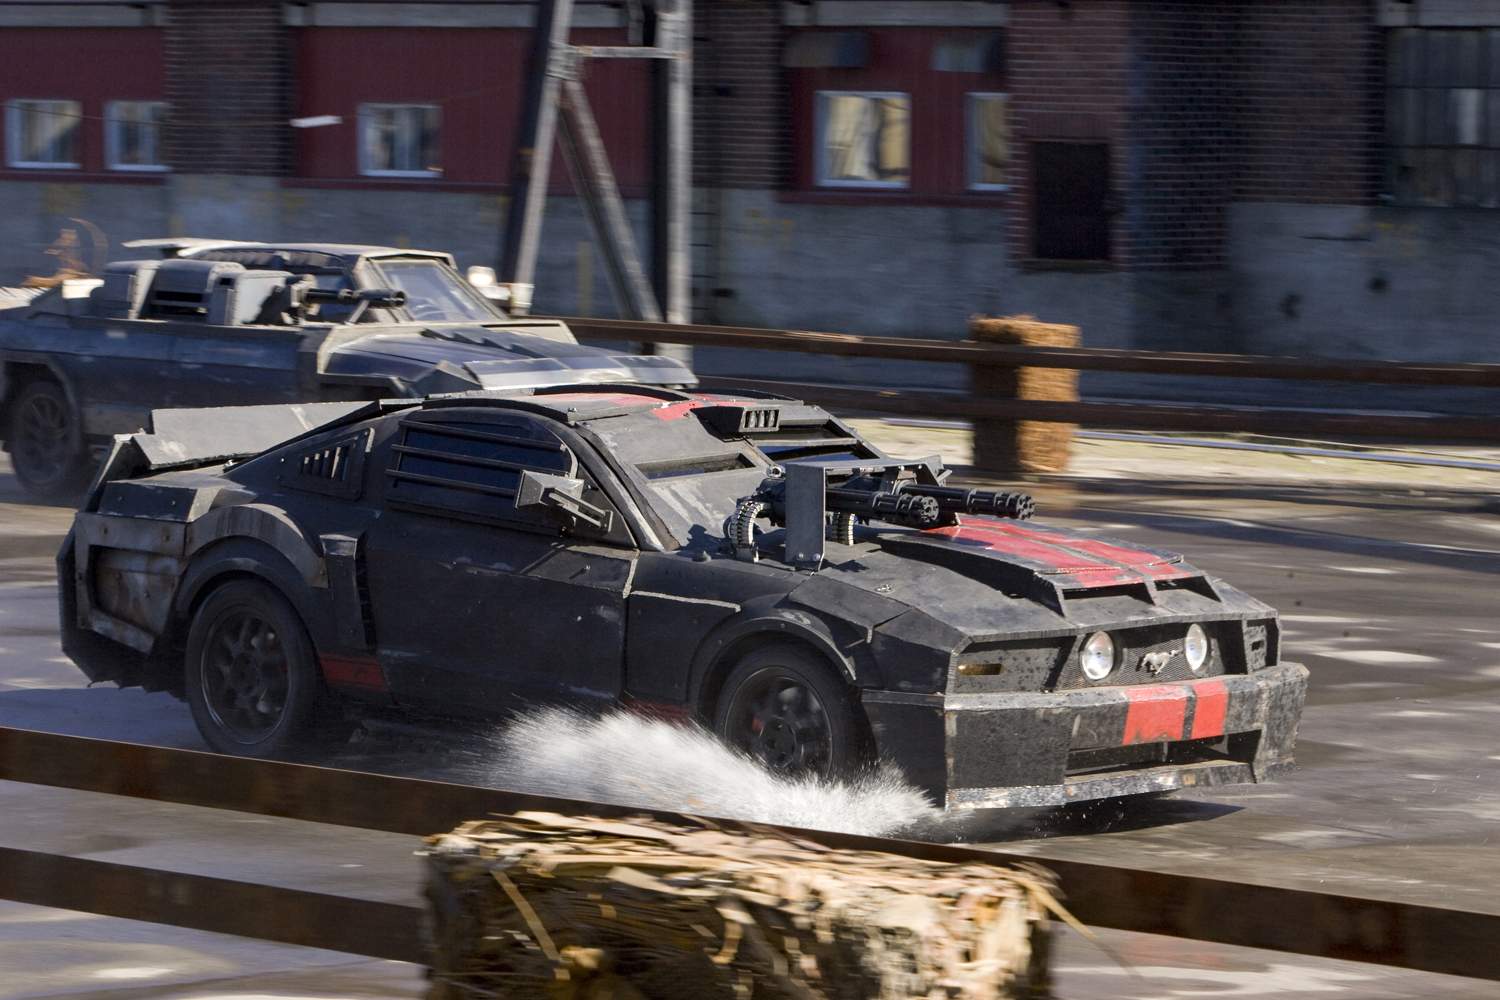 A scene from an action-thriller set of Universal Pictures' Death Race (2008).